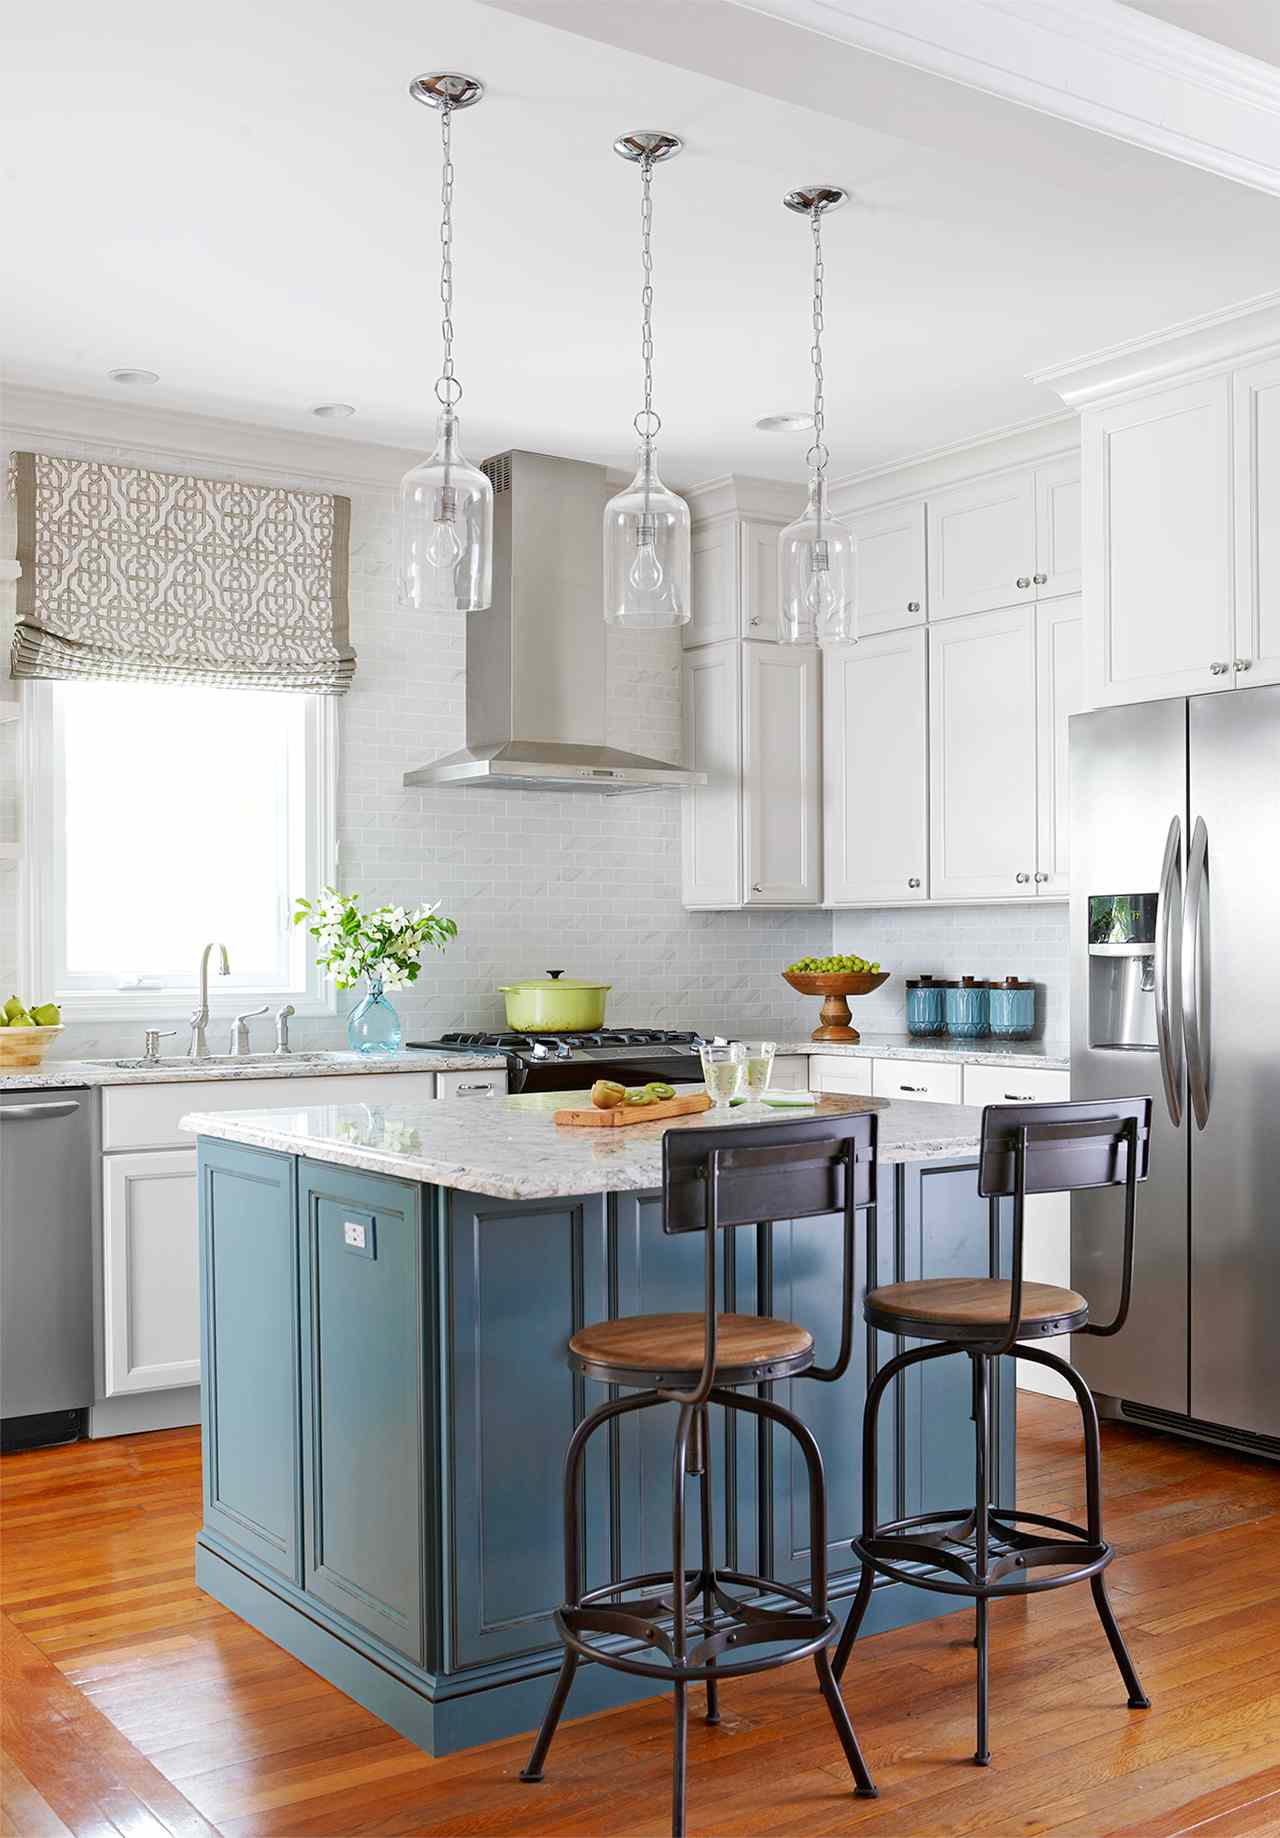 20 Unbelievable Before And After Kitchen Makeovers